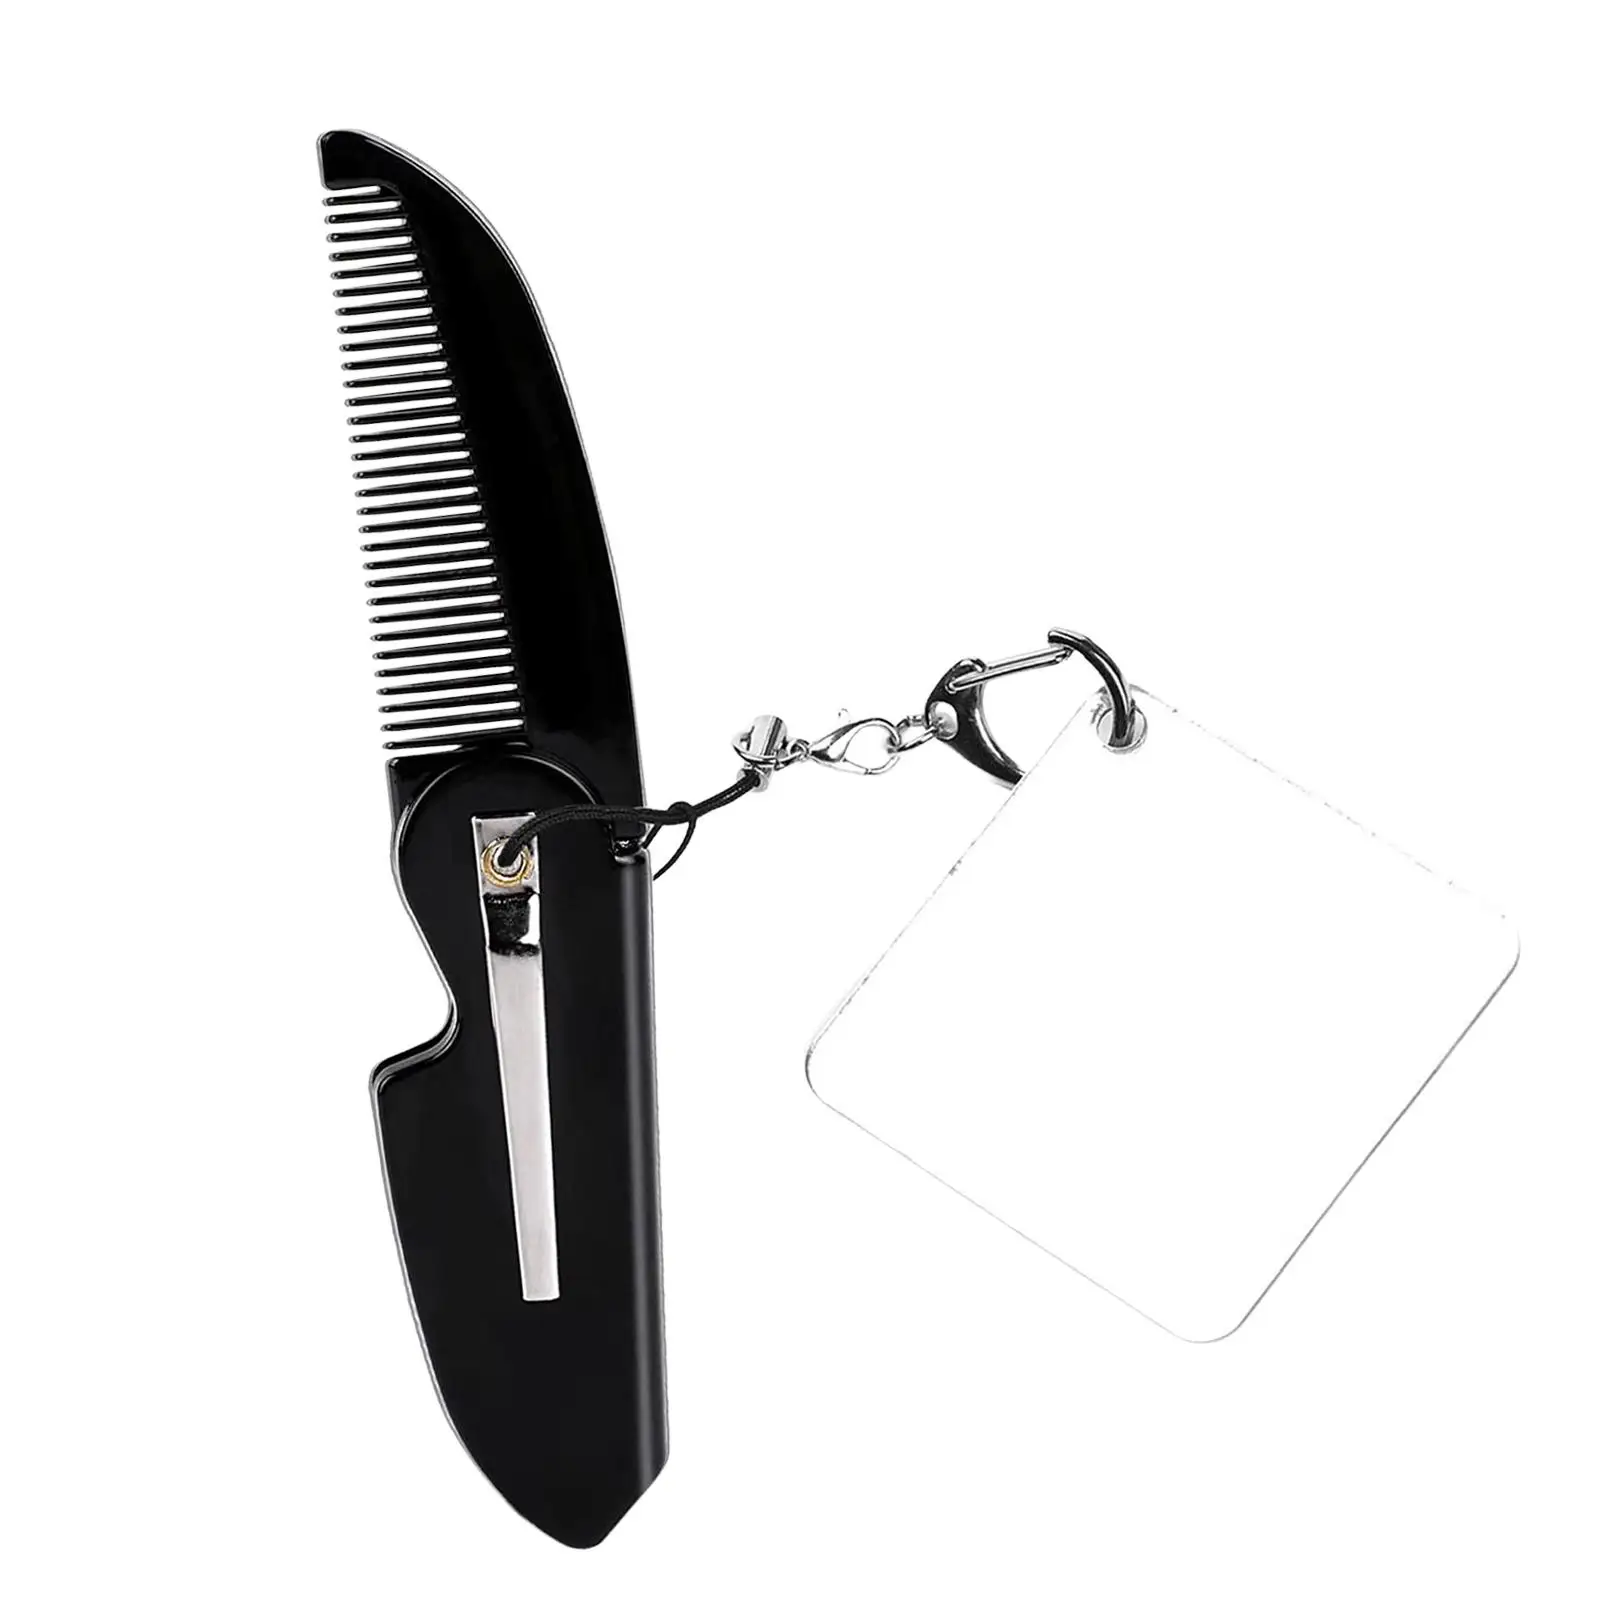 Pocket Comb for Men and Women Easy to Use Everyday Grooming Styling Hair Accessory Durable Beard Gift with Small Acrylic Mirror